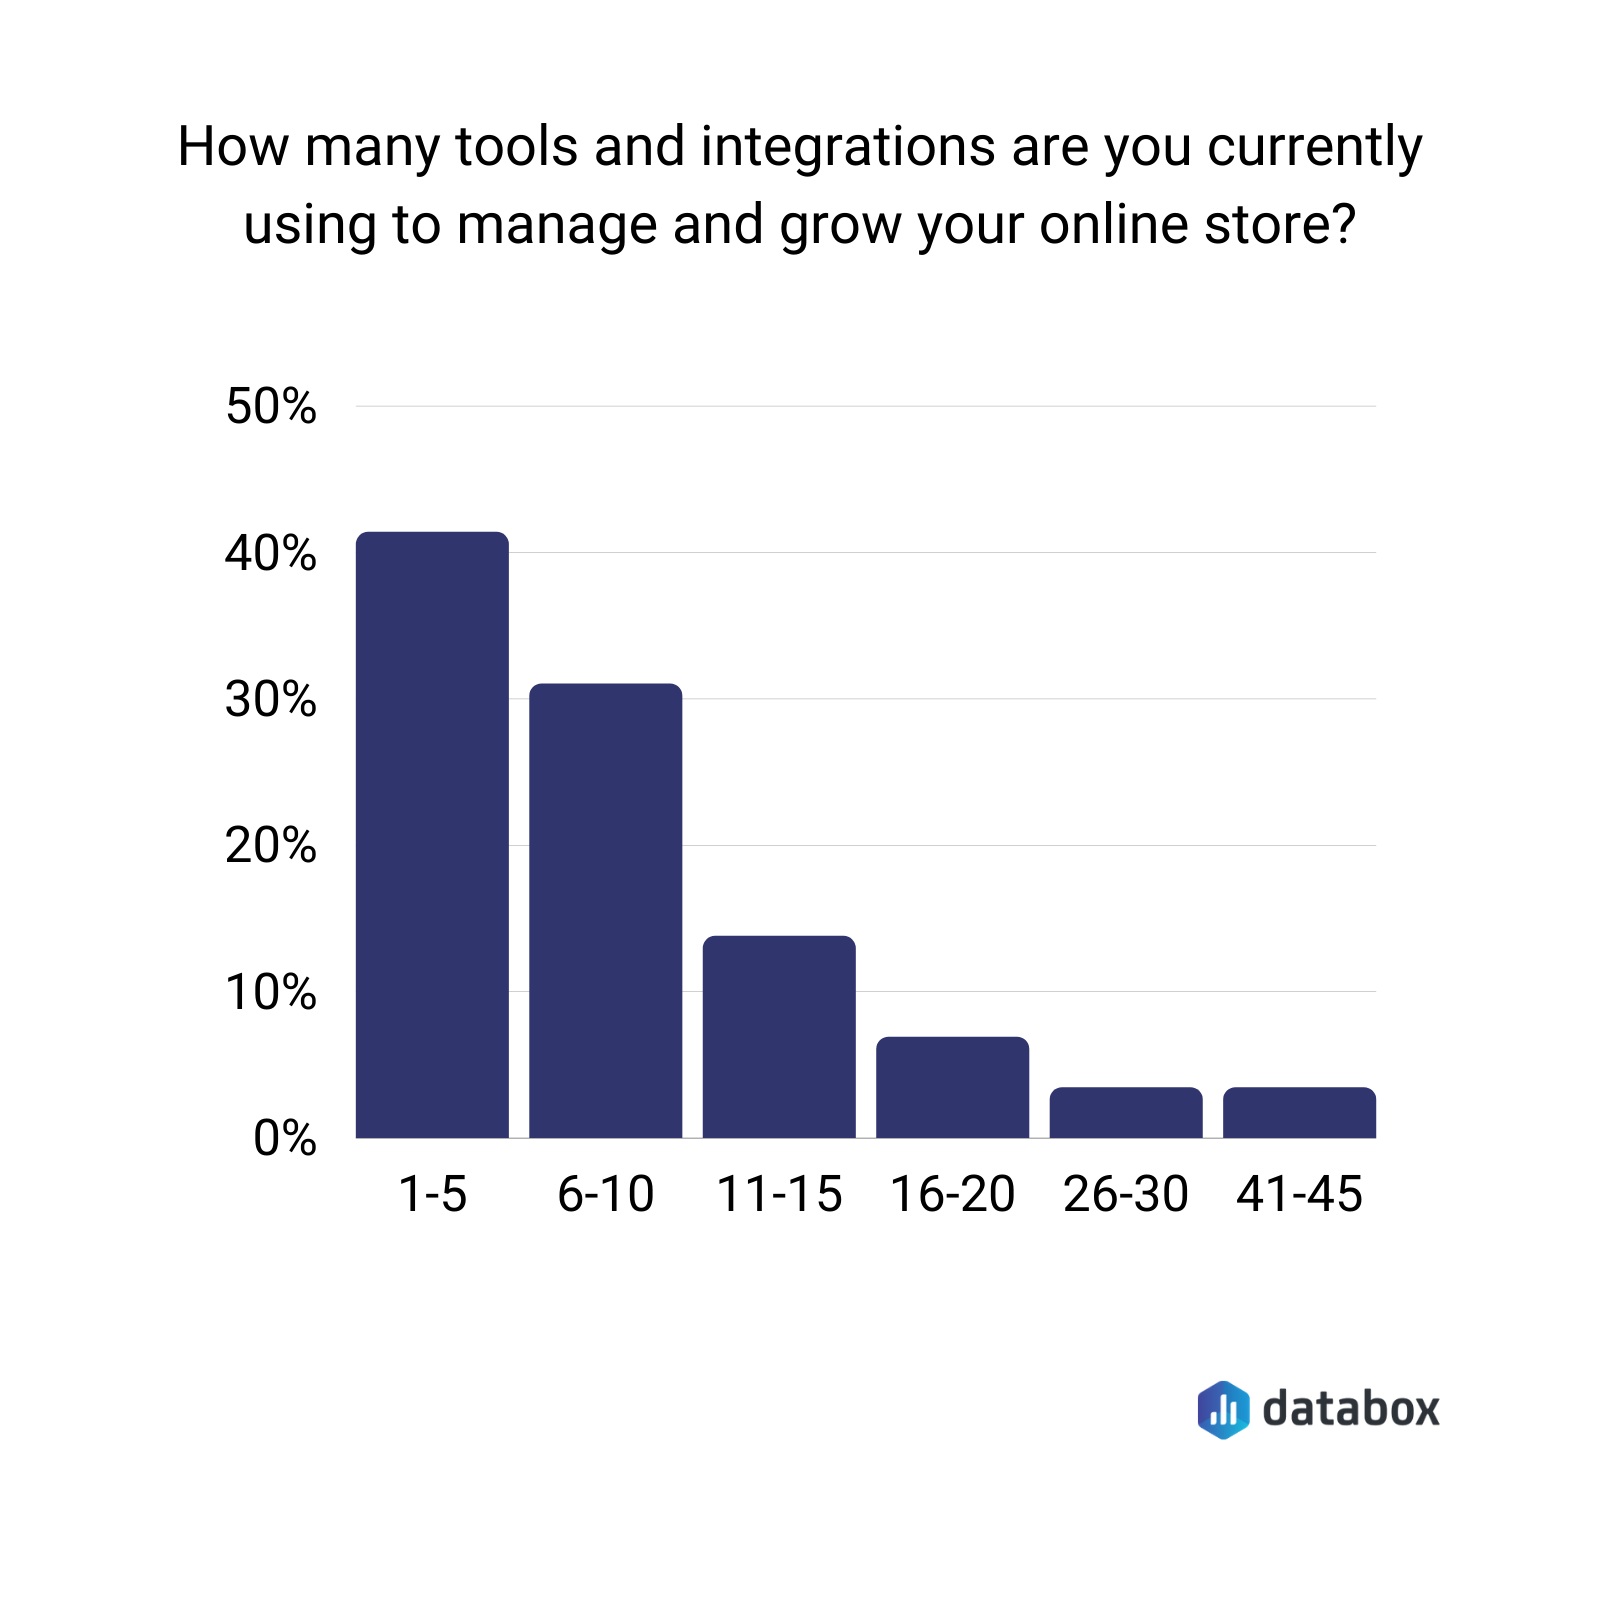 average number of ecommerce tools and integrations used by one online store owner